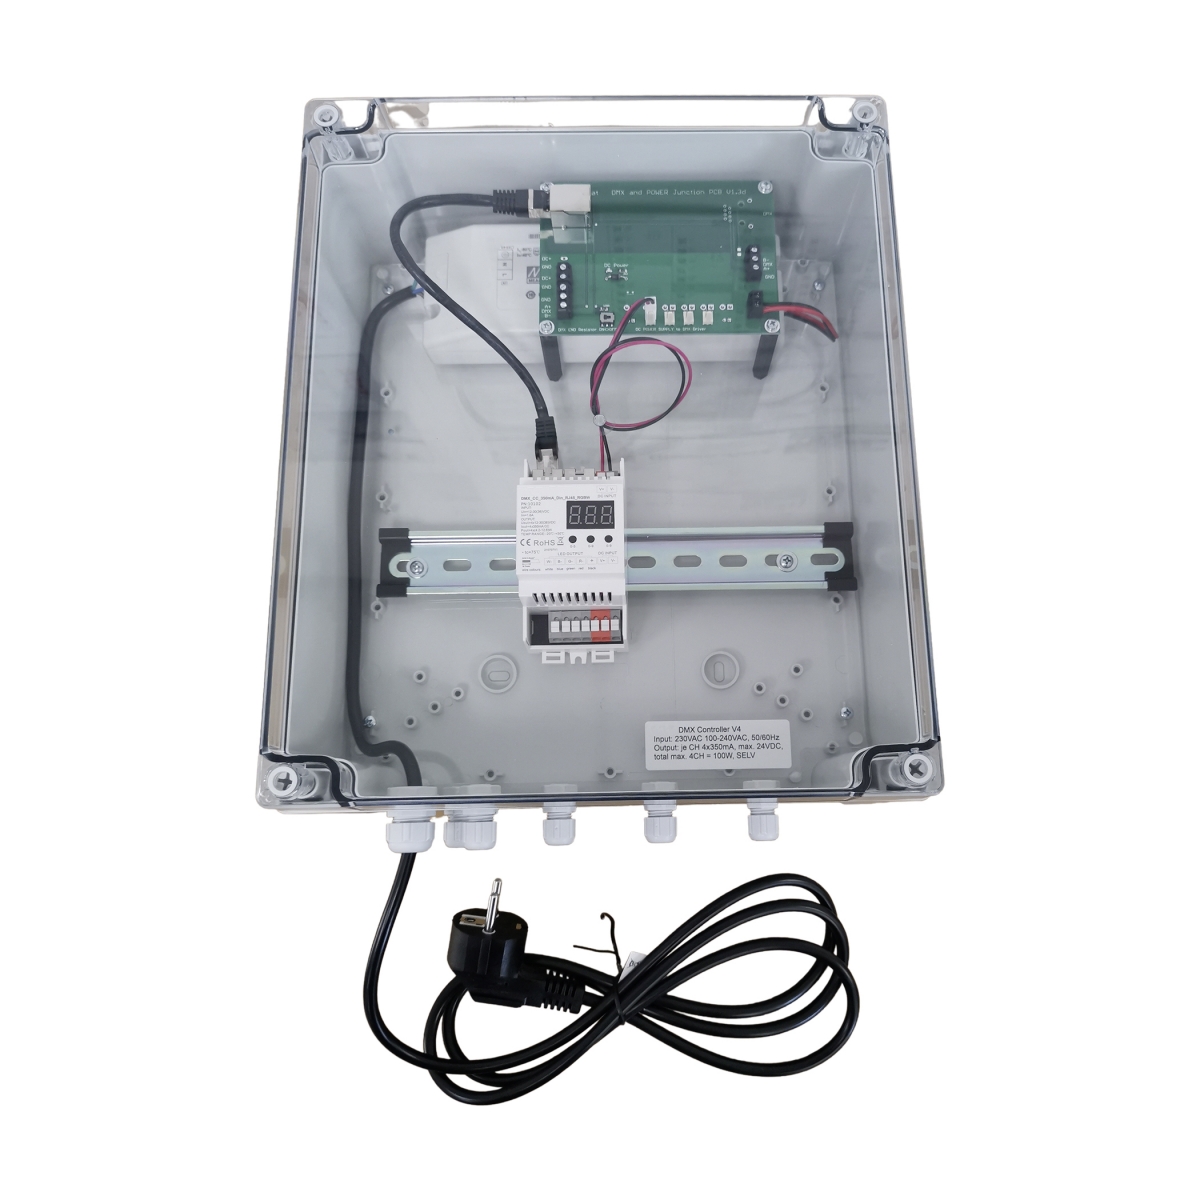 Ocean®control box DMX 350mA, 24V, 100W, power adapter inside, for ONE under water light „Square“ or „Rectangular“, expandable to max. 4 Ocean®control box DMX 350mA, 24V, 100W, power adapter inside, for ONE under water light „Square“ or „Rectangular“, expandable to max. 4